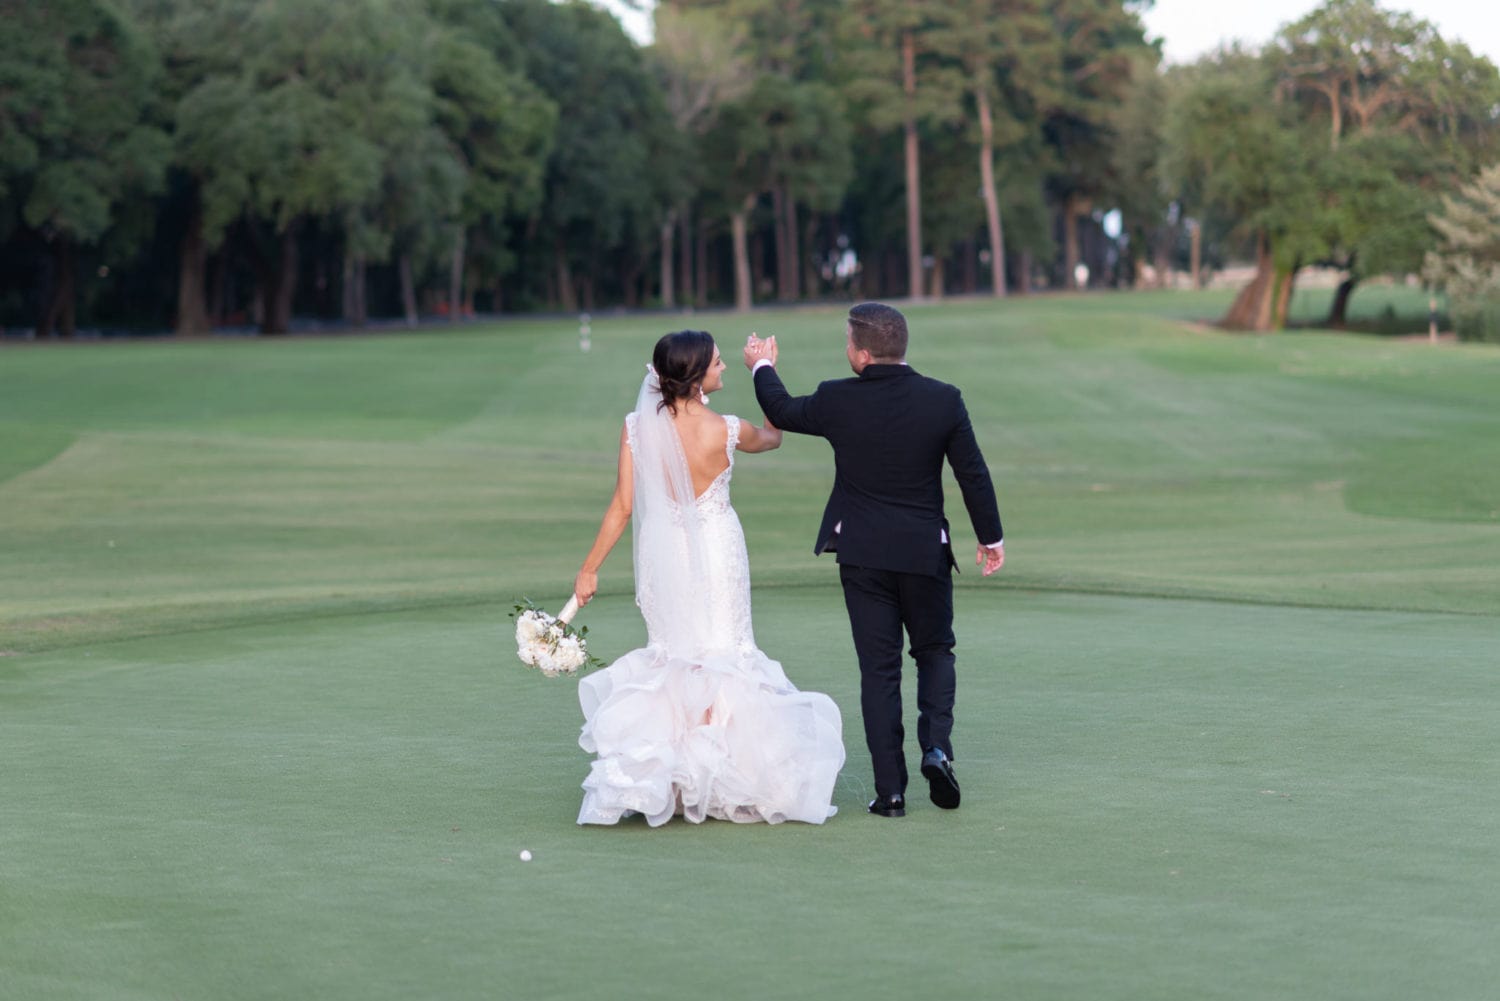 Walking down the golf course holding hands Pawleys Plantation